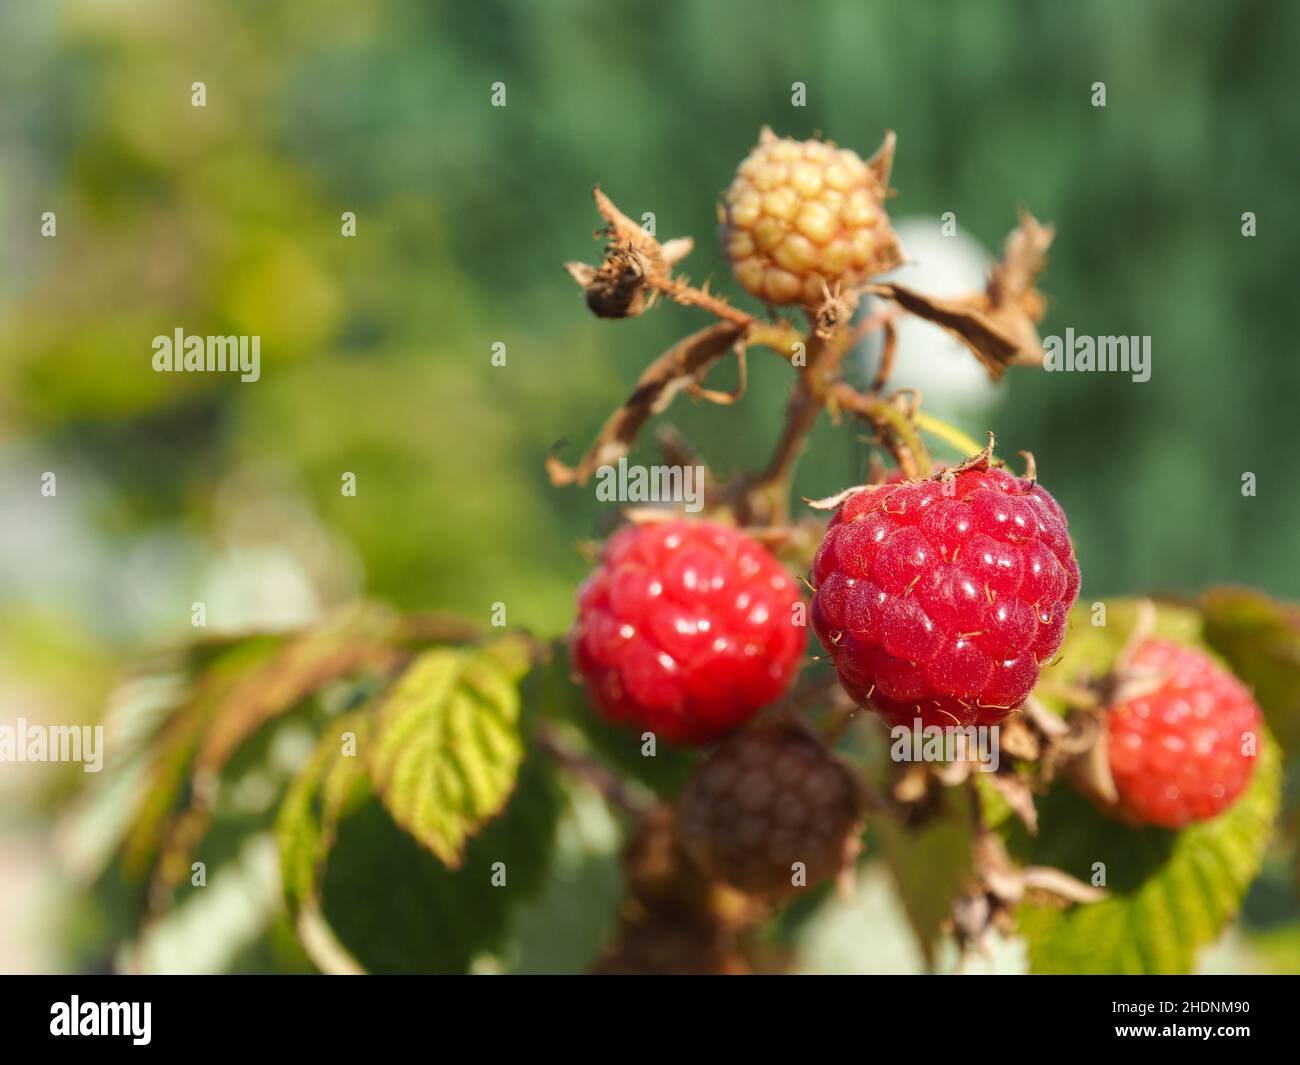 Reifs High Resolution Stock Photography and Images - Alamy